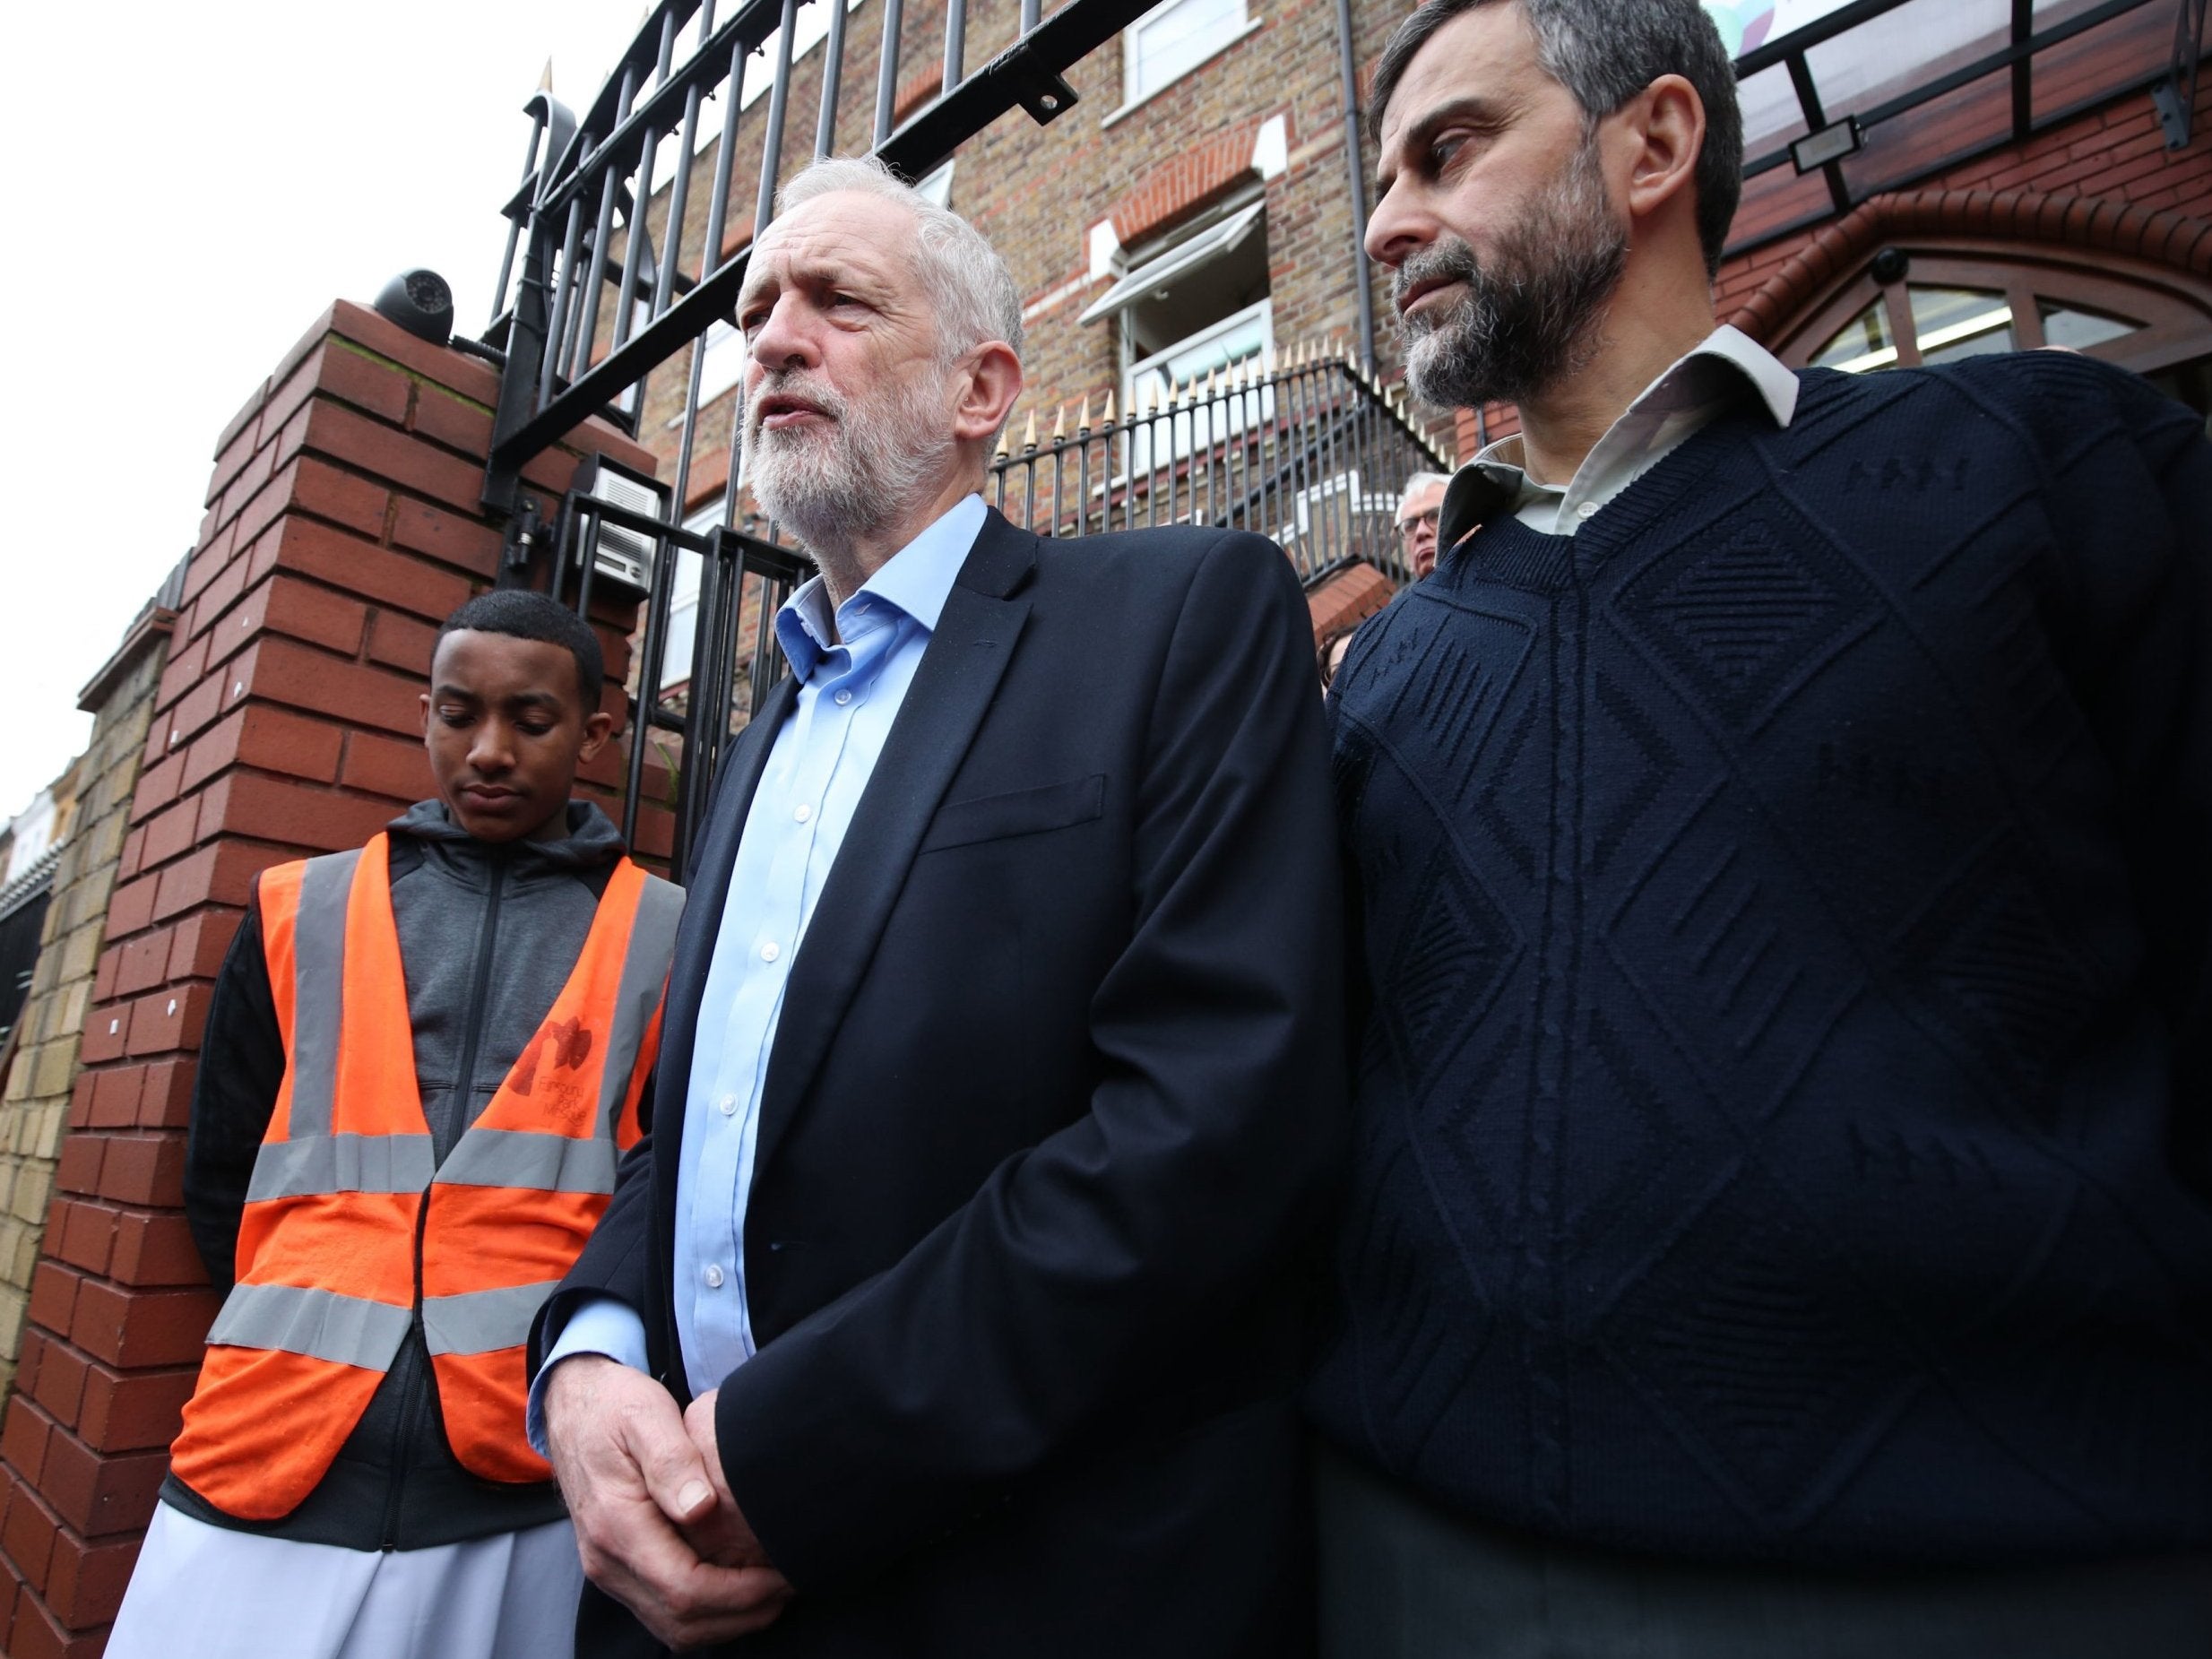 Jeremy Corbyn speaking outside Finsbury Park Mosque following the Christchurch attack